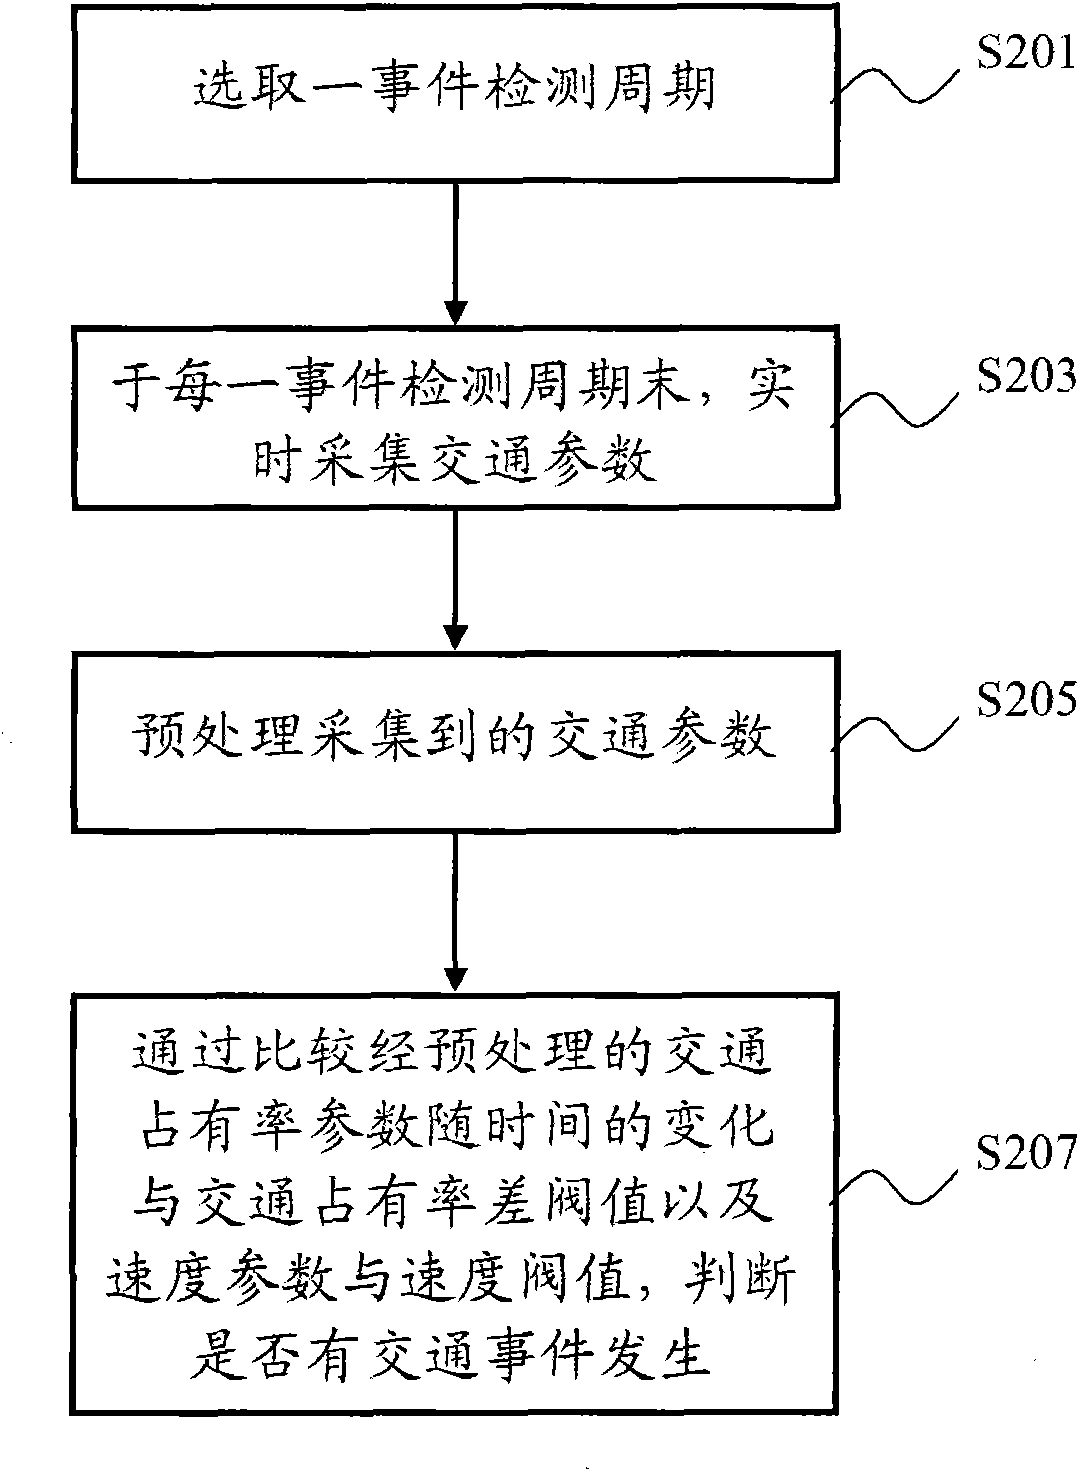 Method and system for detecting road traffic incidents